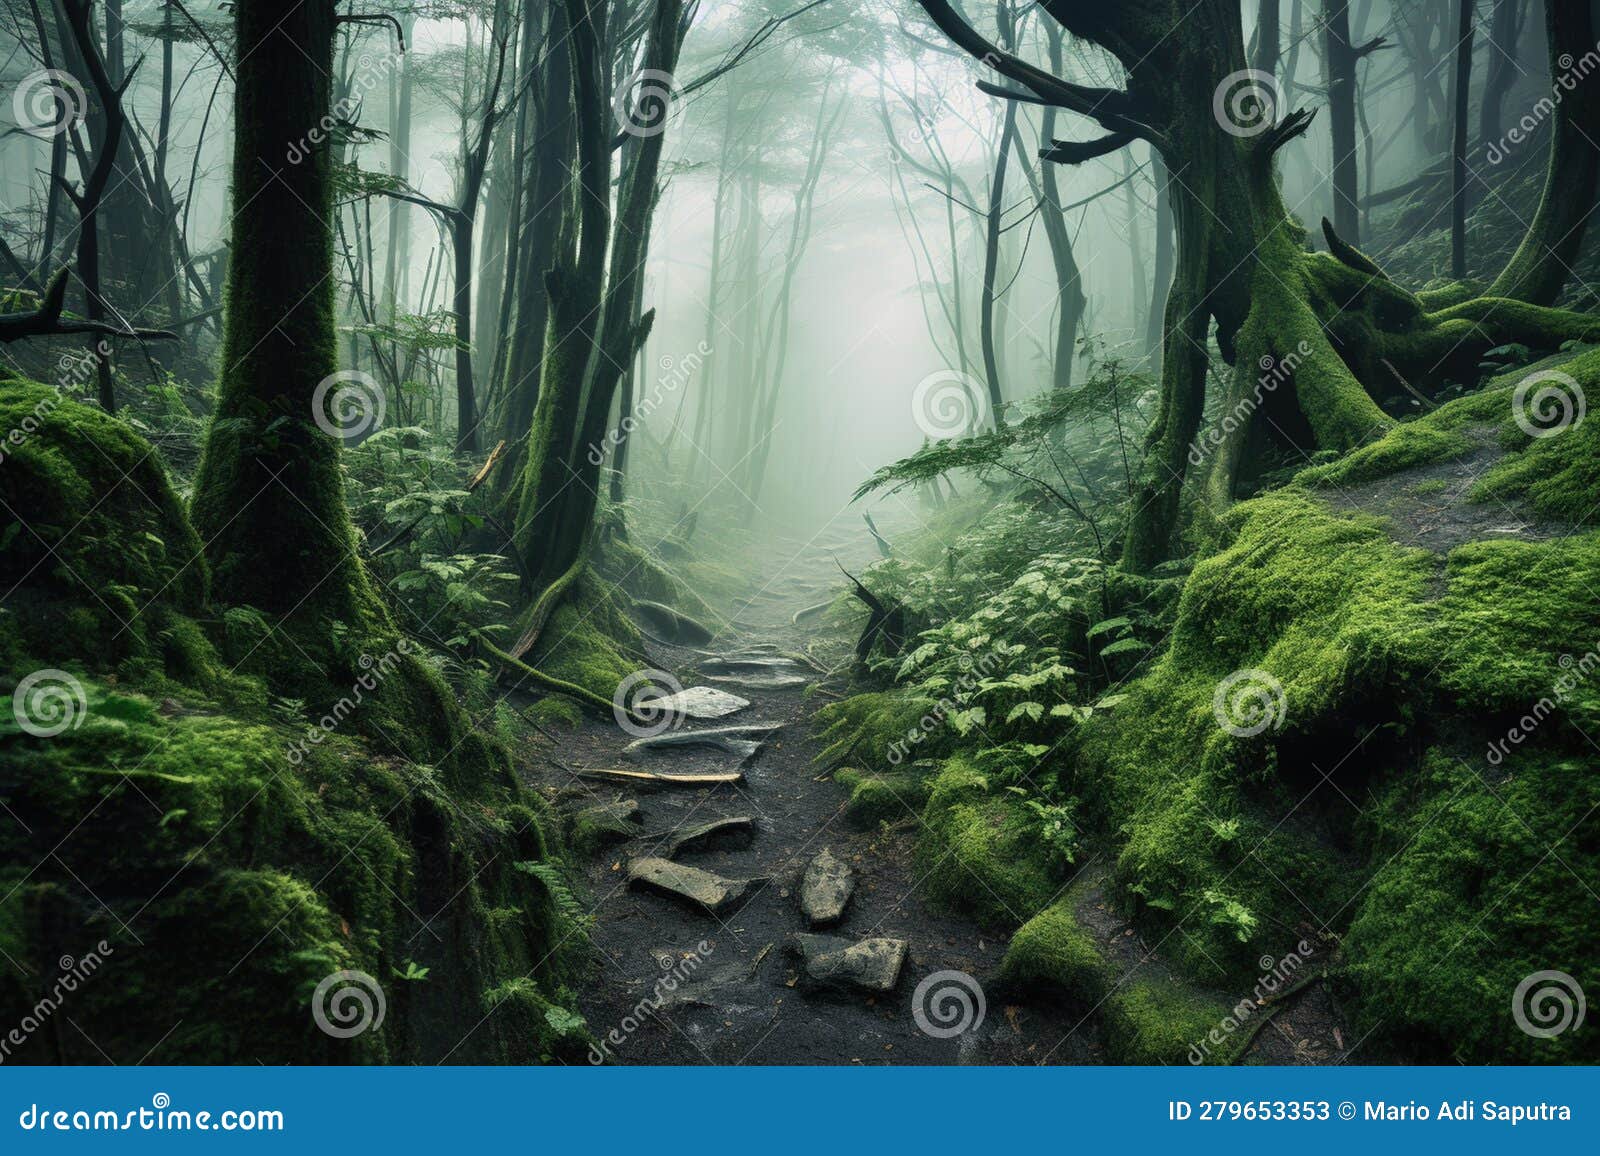 Exploring the Enigmatic Forest S Silky Layers Stock Image - Image of